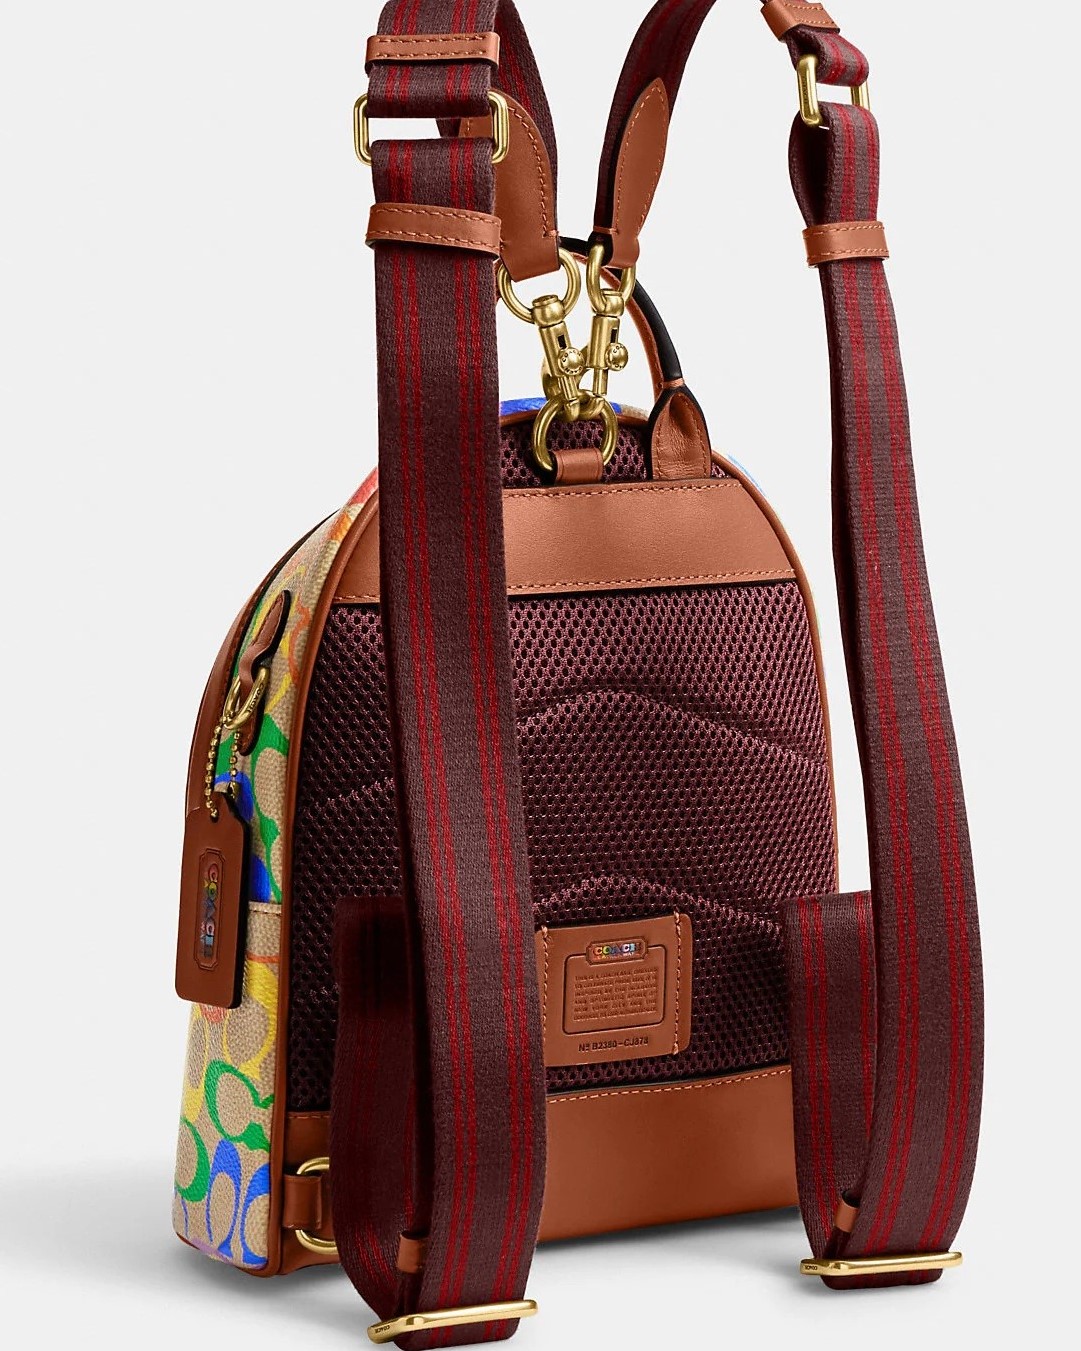 BALO NỮ COACH CẦU VỒNG CHARTER BACKPACK 18 IN RAINBOW SIGNATURE CANVAS CJ878 4